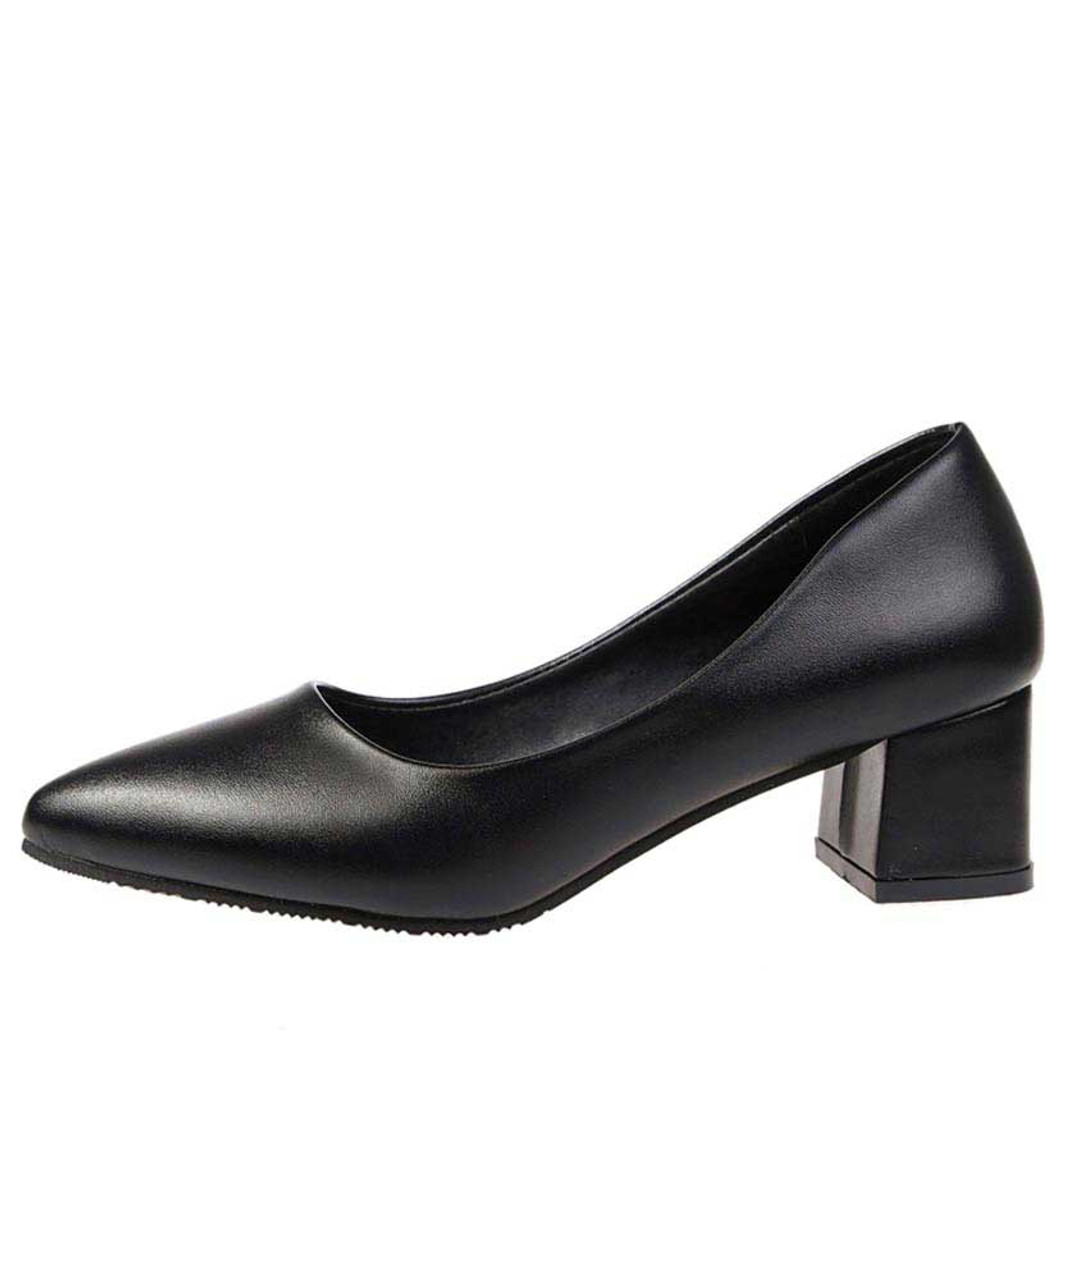 black leather mid heel court shoes